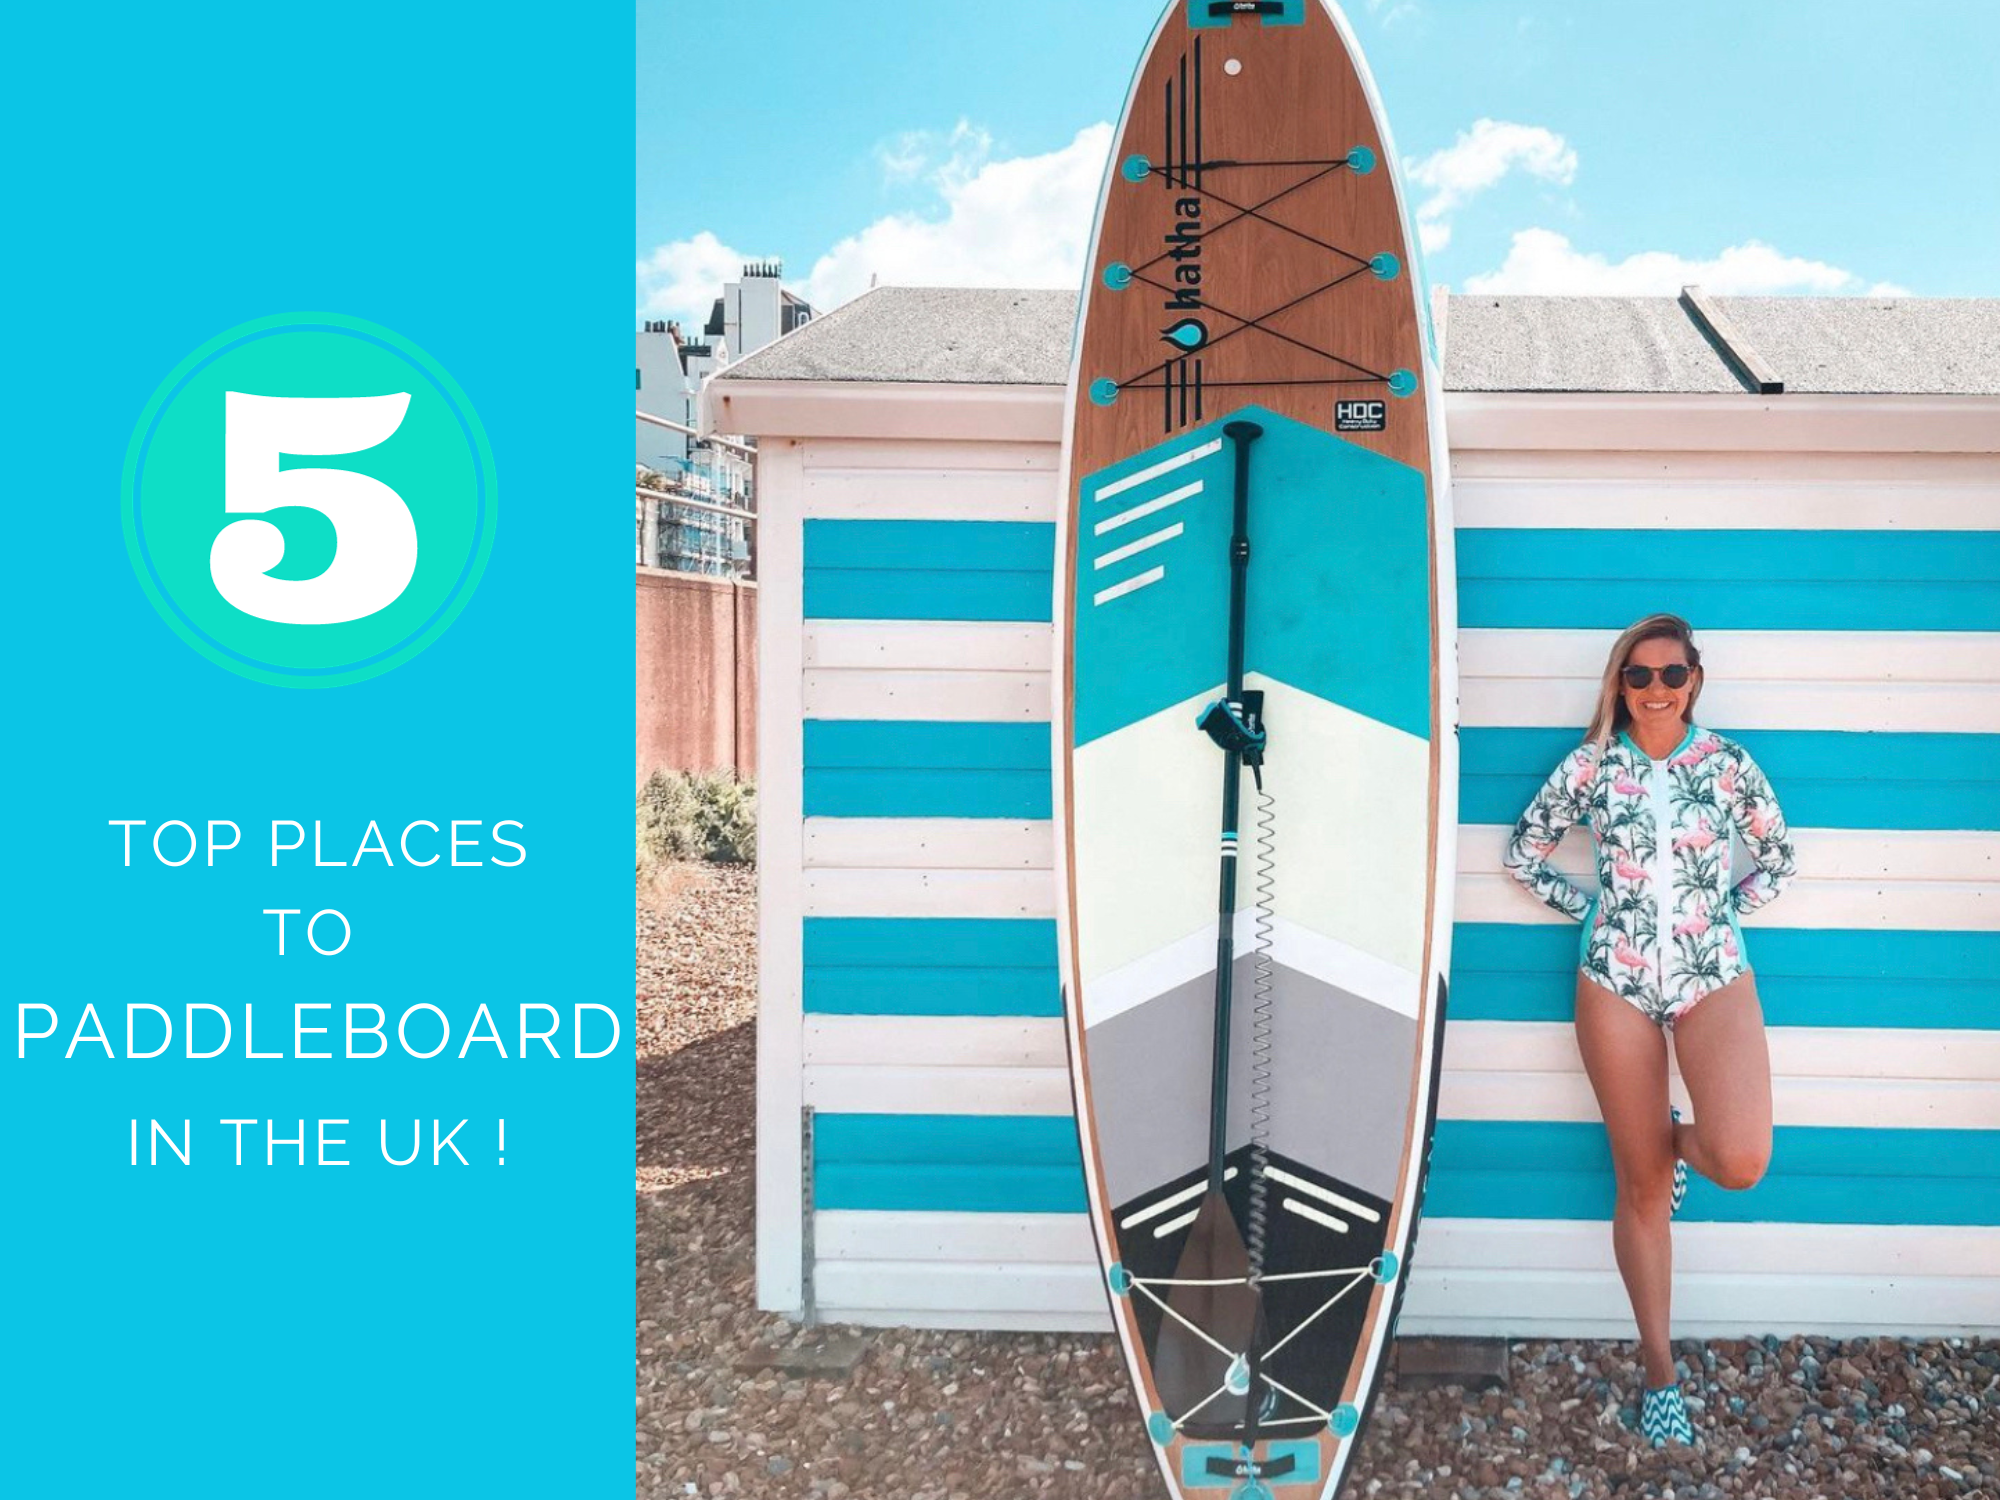 Euphoric Threads Eco Fashion for the Waves and Raves - Sustainable Handmade Swimwear and Surfwear - TOP 5 PLACES TO PADDLEBOARD IN THE UK